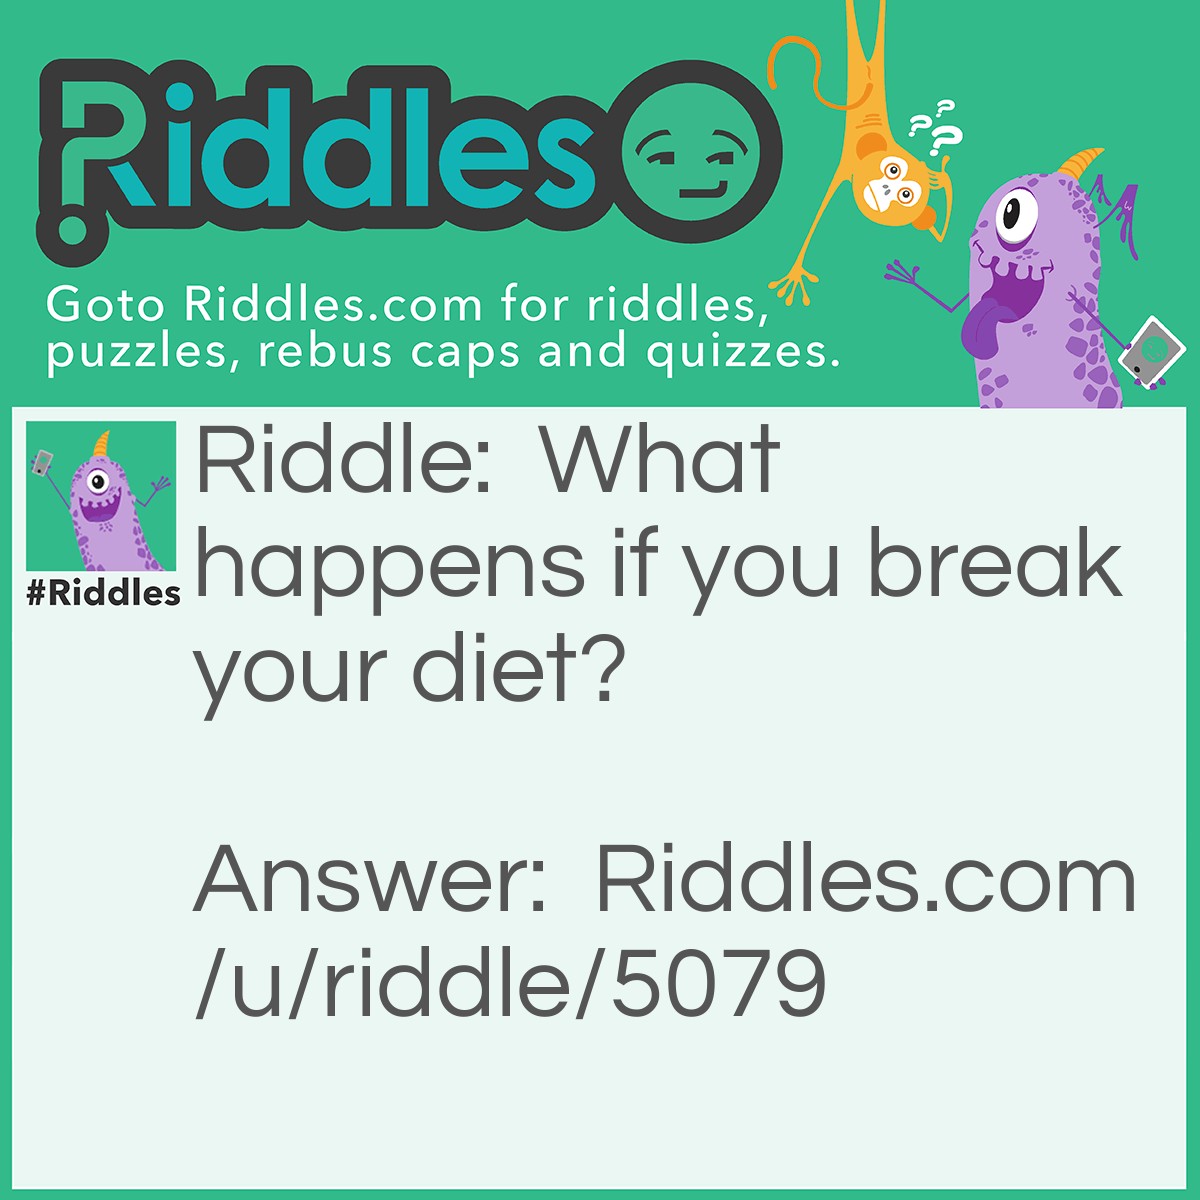 Riddle: What happens if you break your diet? Answer: Your insinuate! Your (in-sin-, you-ate)!